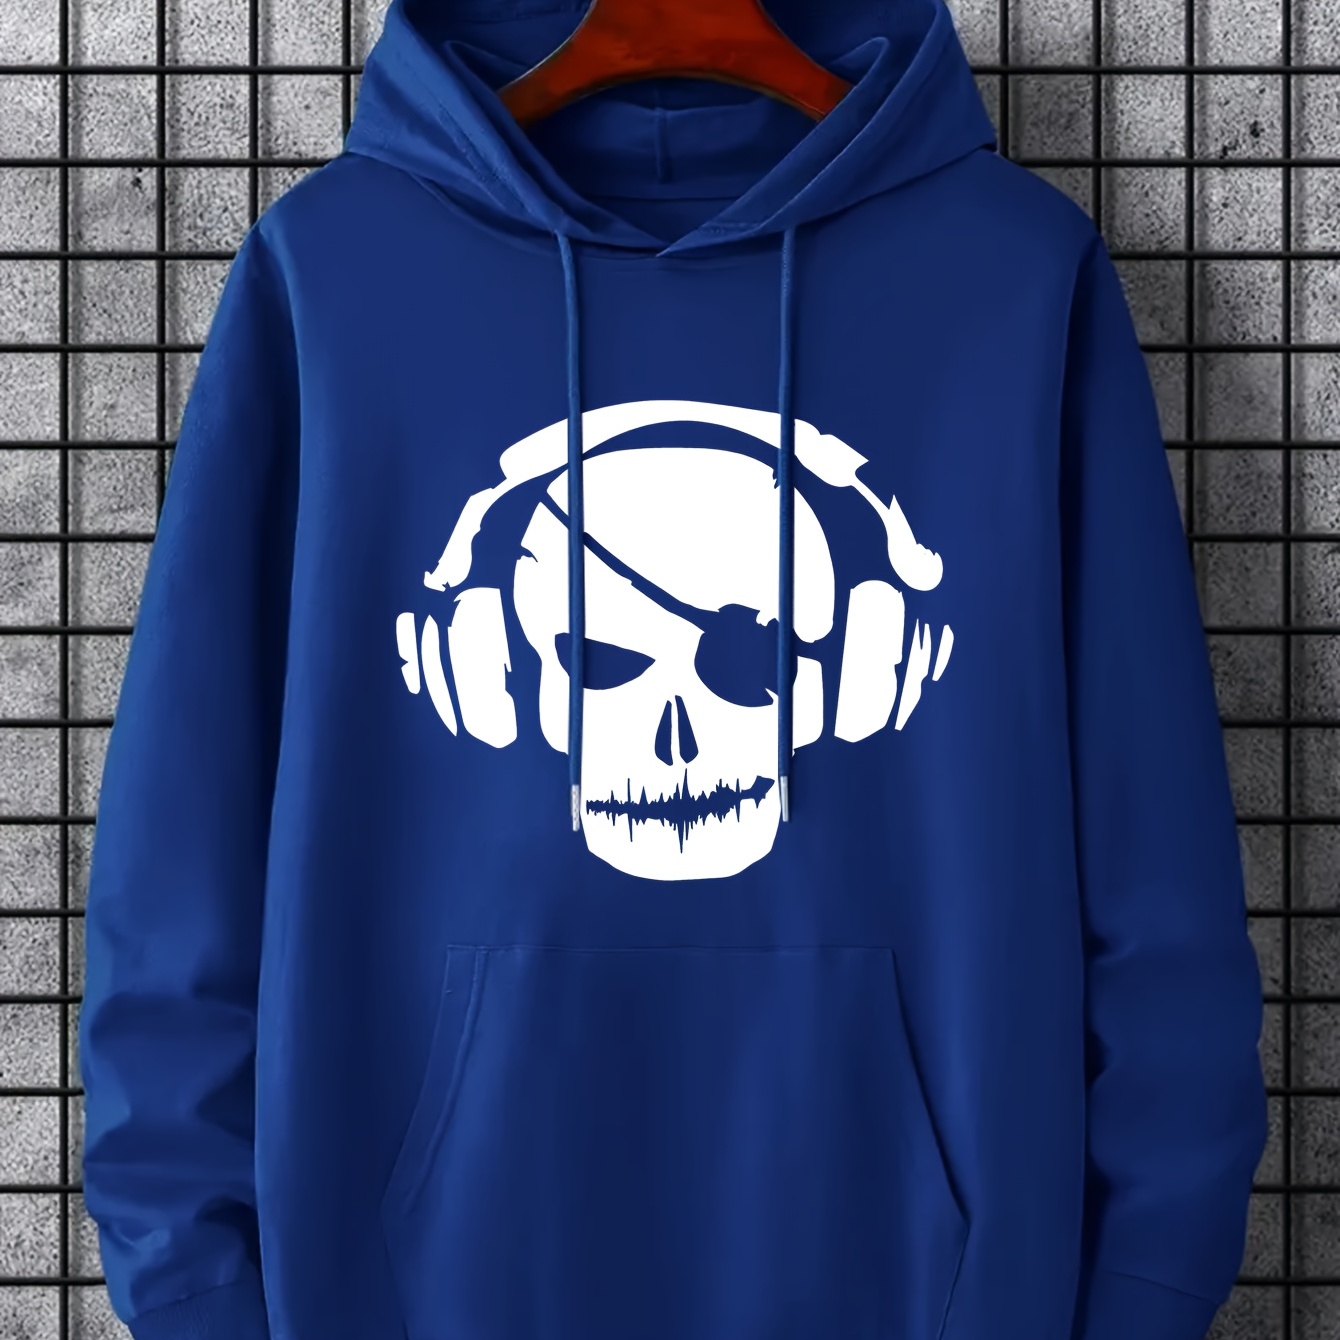 

Skull Print Hoodie, Hoodies For Men, Men's Casual Graphic Design Pullover Hooded Sweatshirt With Kangaroo Pocket For Winter Autumn, As Gifts